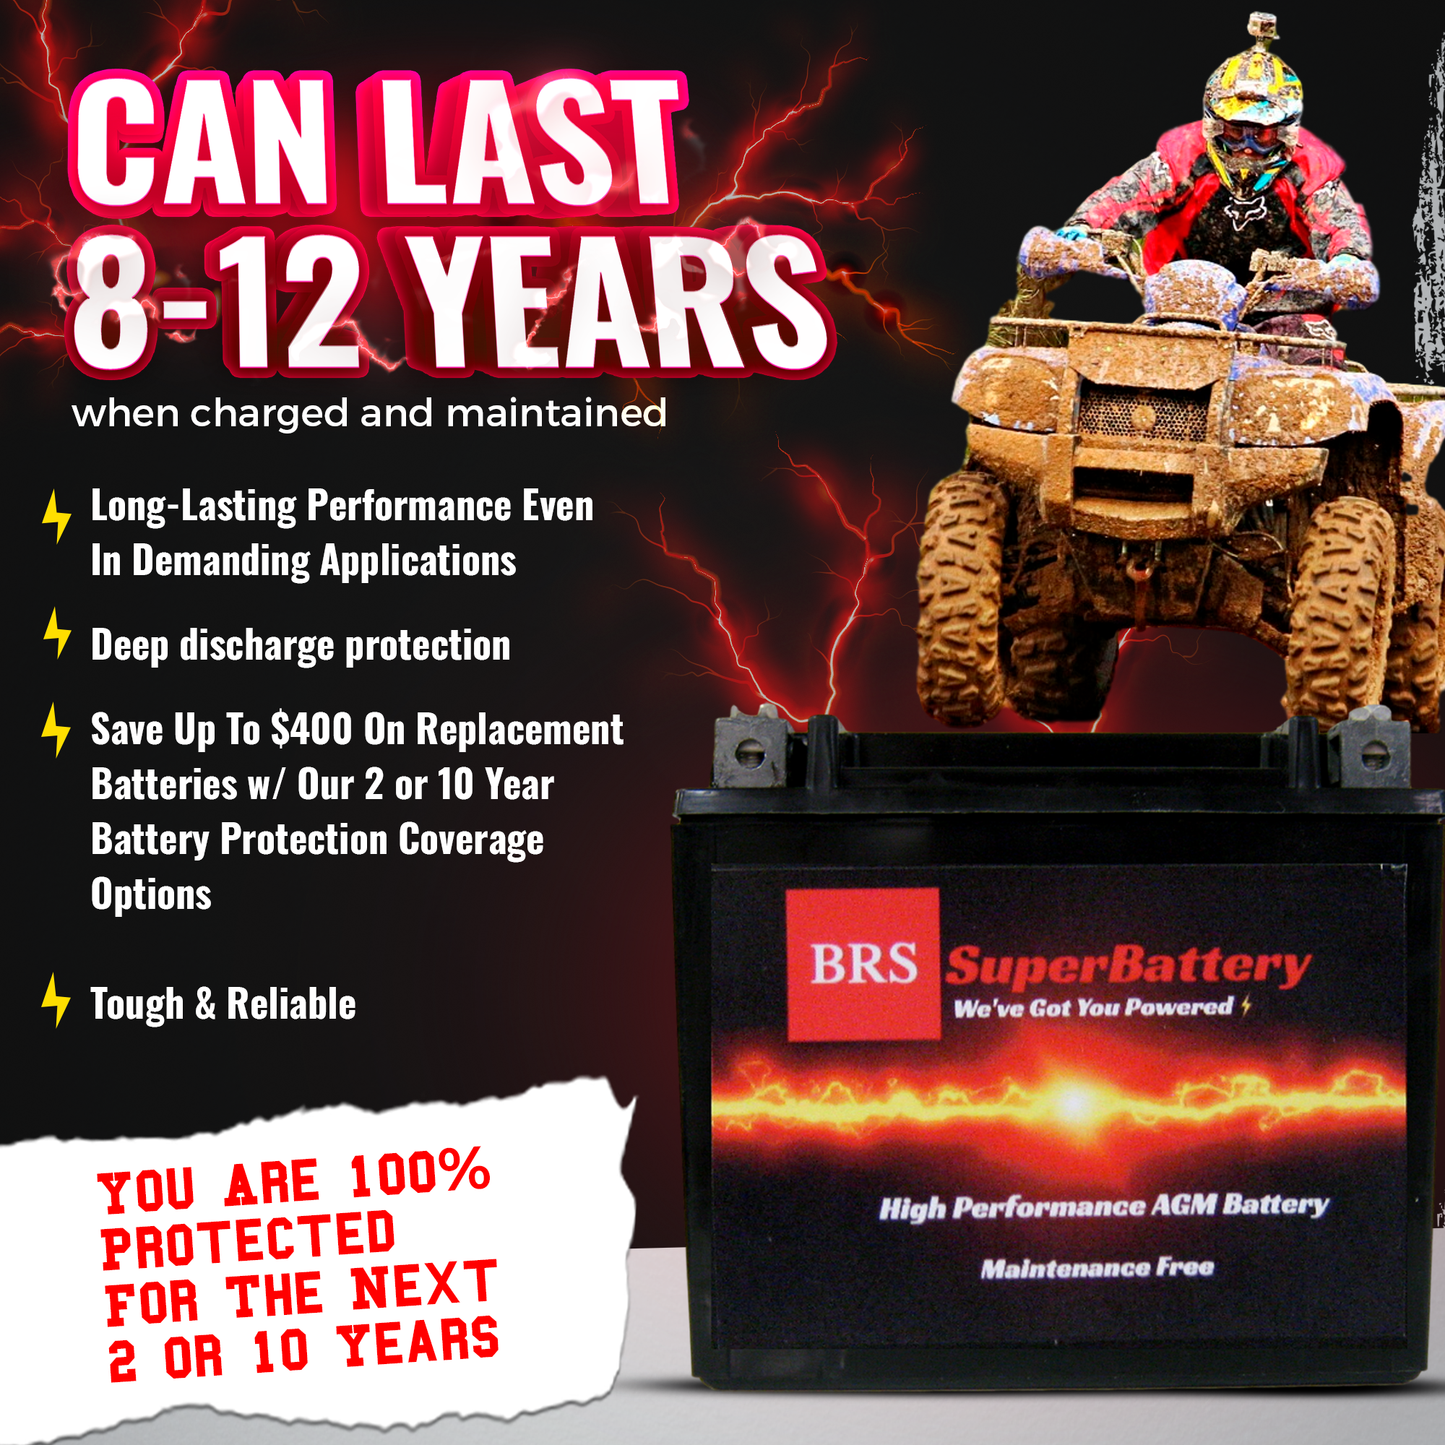 BRS9-BS 12v High Performance Sealed AGM PowerSport 2 Year Battery - BRS Super Battery